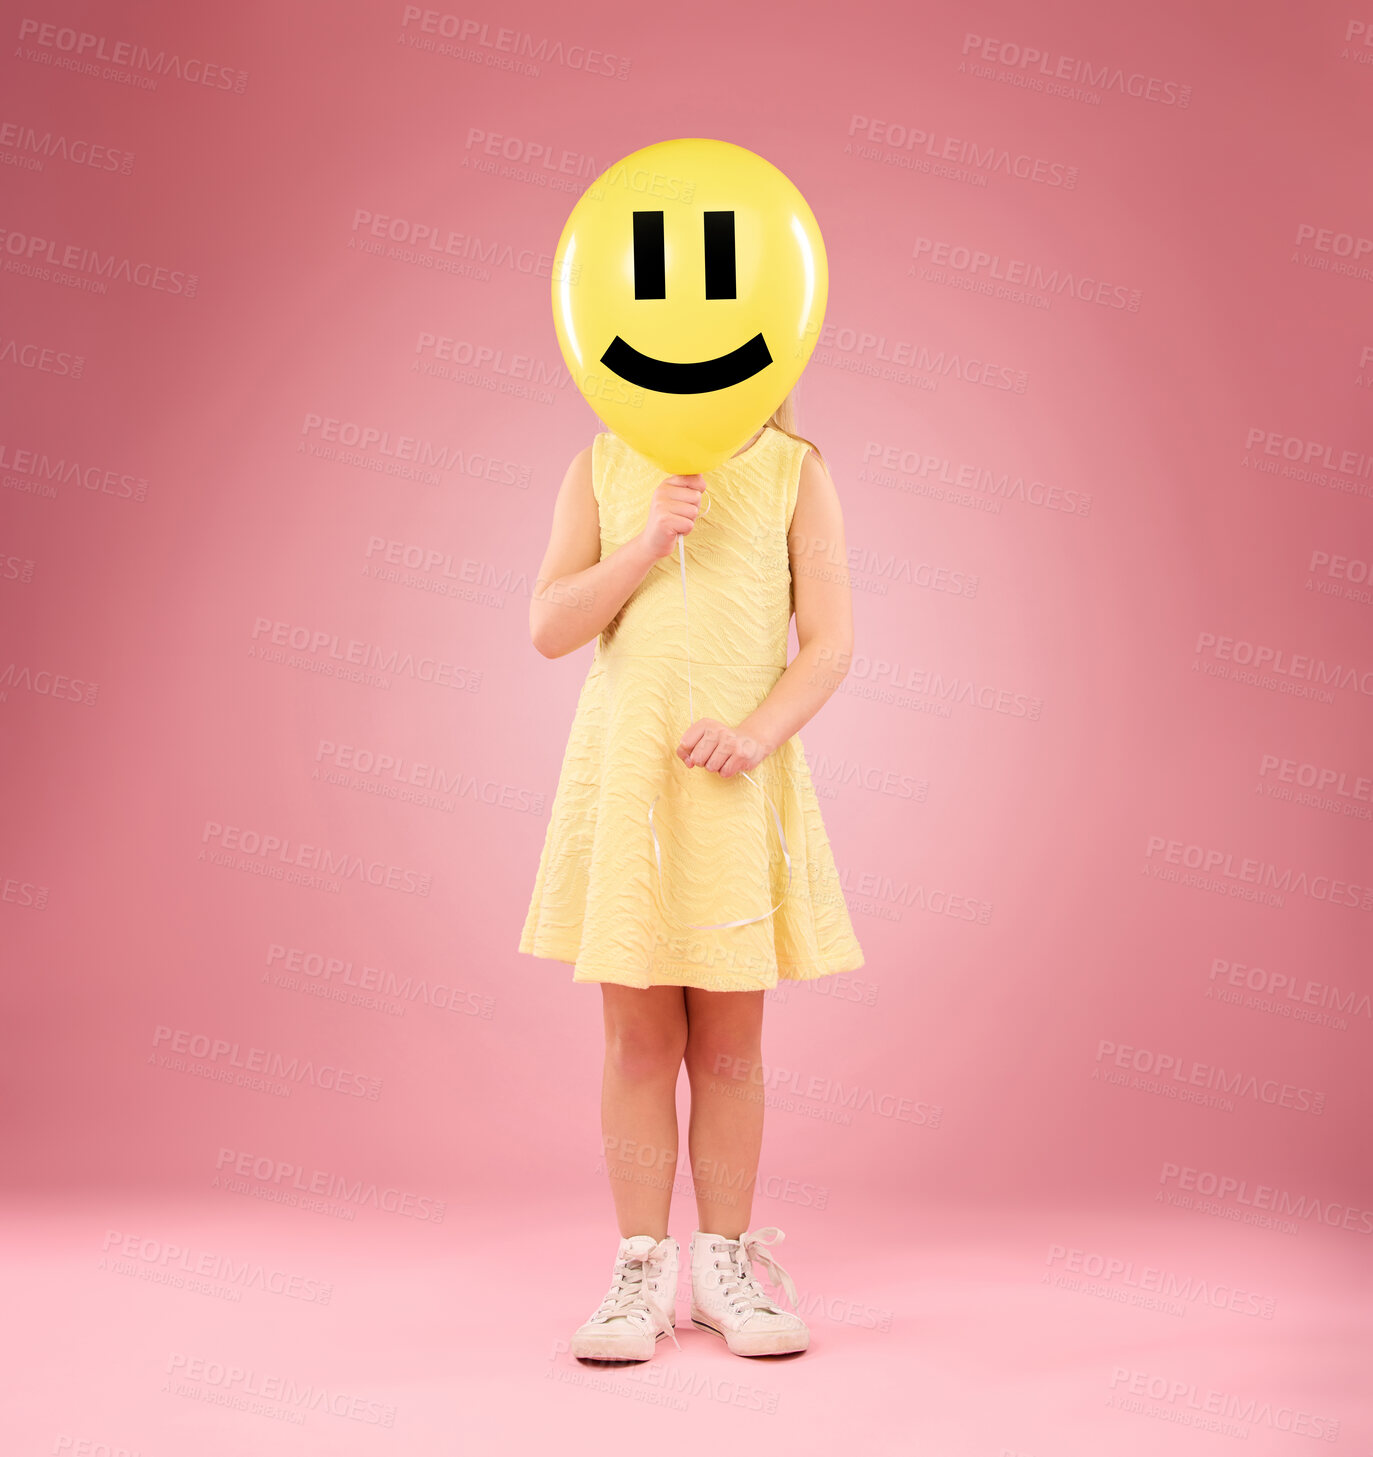 Buy stock photo Emoji face, balloon and child in studio, covering and hiding against a pink background space. Happy, smile and girl holding toy, game and playing while posing behind inflatable, fun and innocent